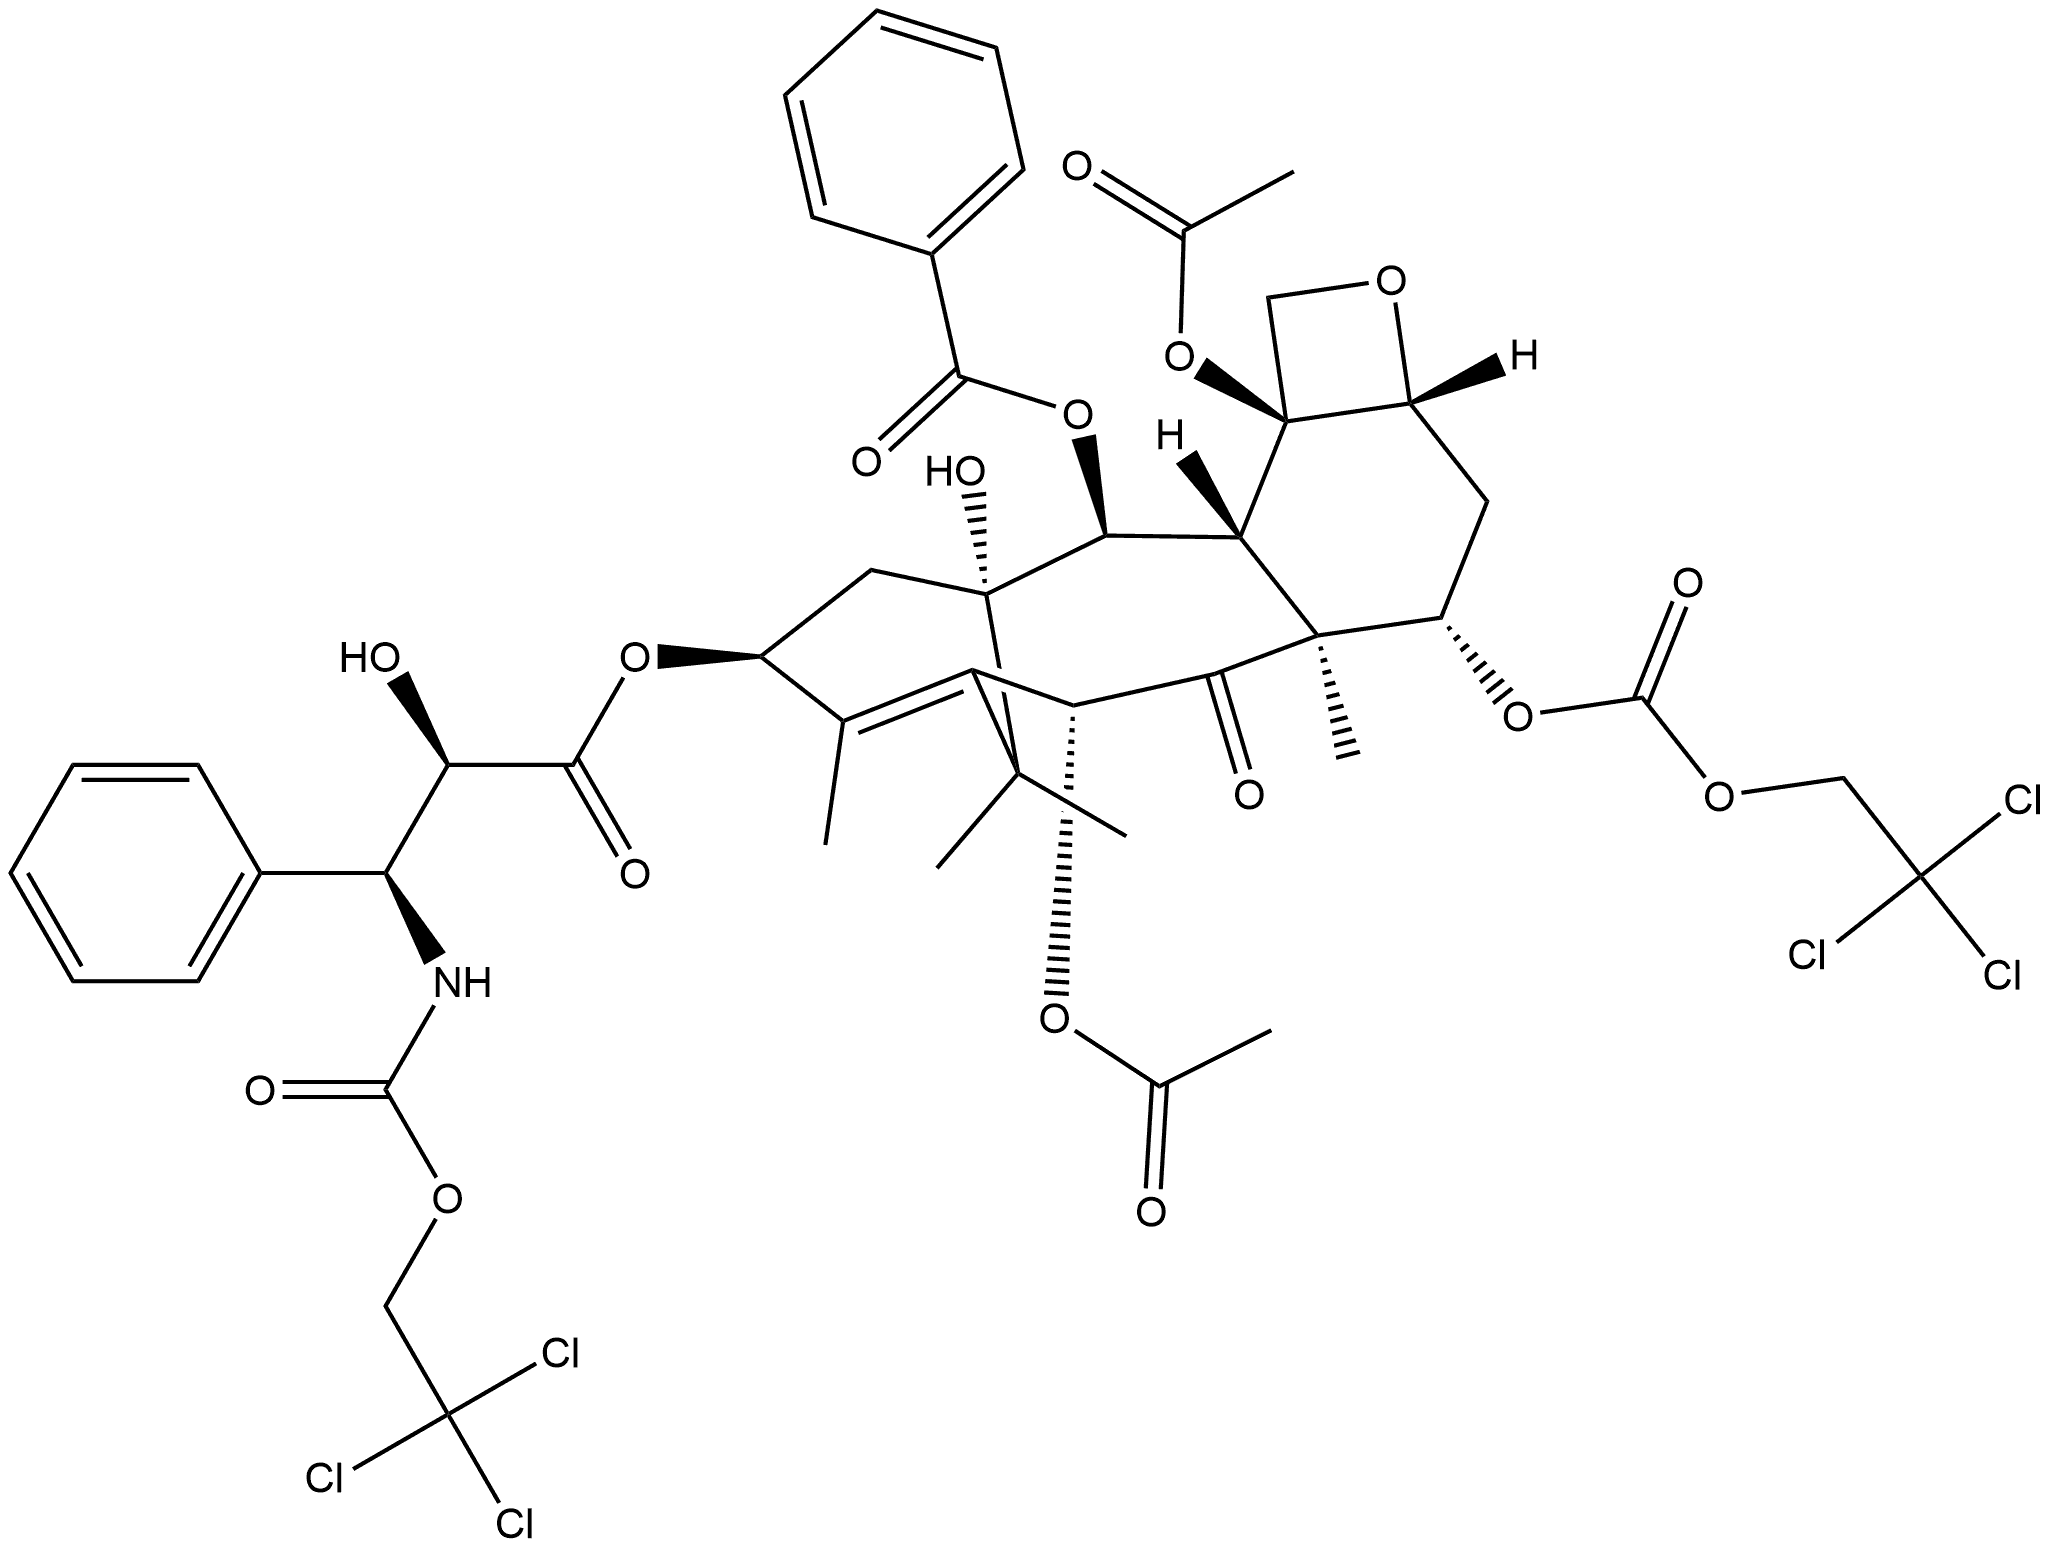 Benzenepropanoic acid, α-hydroxy-β-[[(2,2,2-trichloroethoxy)carbonyl]amino]-, (2aR,4S,4aS,6R,9S,11S,12S,12aR,12bS)-6,12b-bis(acetyloxy)-12-(benzoyloxy)-2a,3,4,4a,5,6,9,10,11,12,12a,12b-dodecahydro-11-hydroxy-4a,8,13,13-tetramethyl-5-oxo-4-[[(2,2,2-trichloroethoxy)carbonyl]oxy]-7,11-methano-1H-cyclodeca[3,4]benz[1,2-b]oxet-9-yl ester, (αR,βS)- Structure